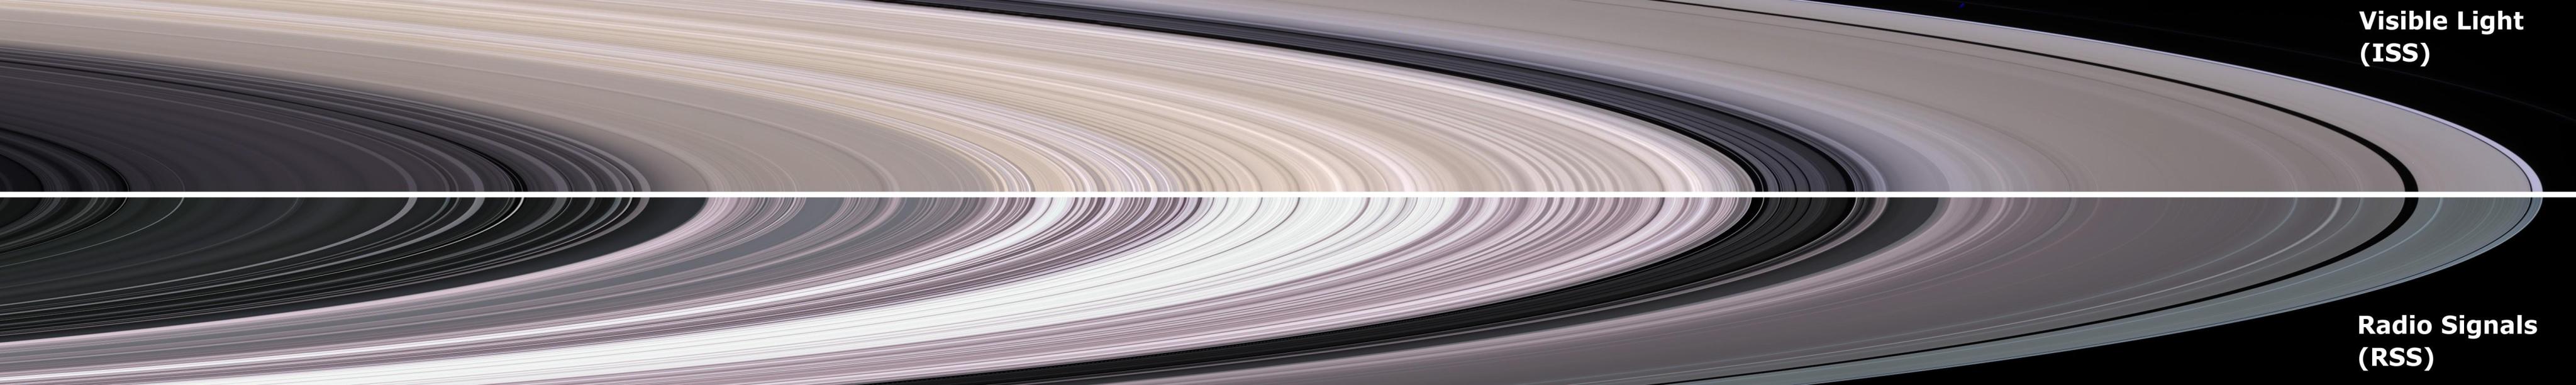 The image compares structure of Saturns rings